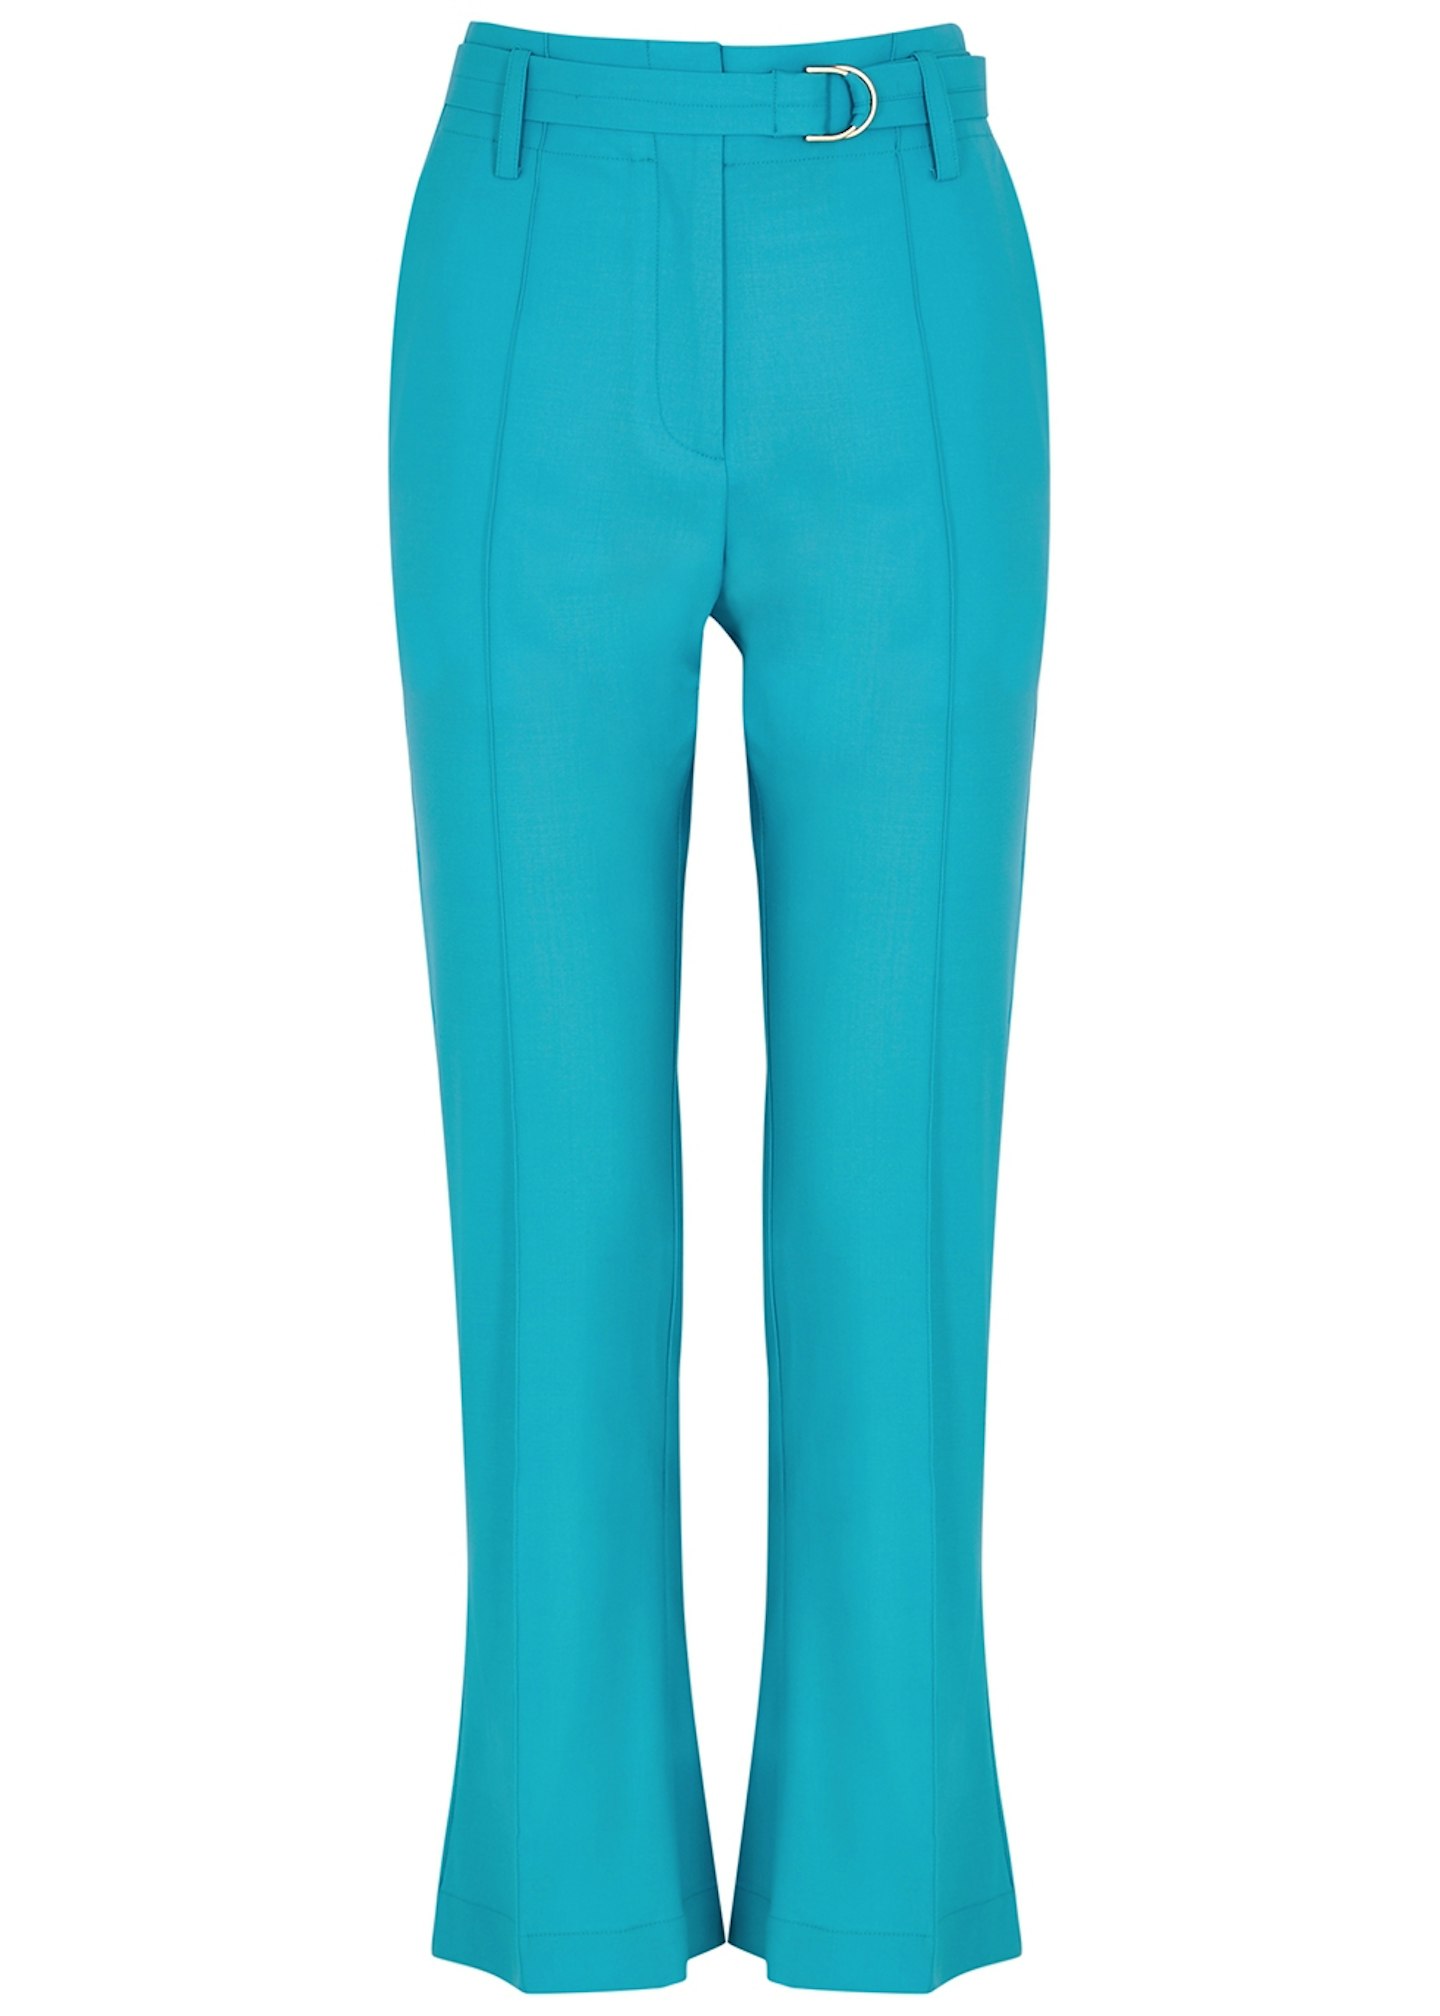 Eudon Choi, Evelyn Kick-Flare Stretch-Wool Trousers, Was £395, Now £158